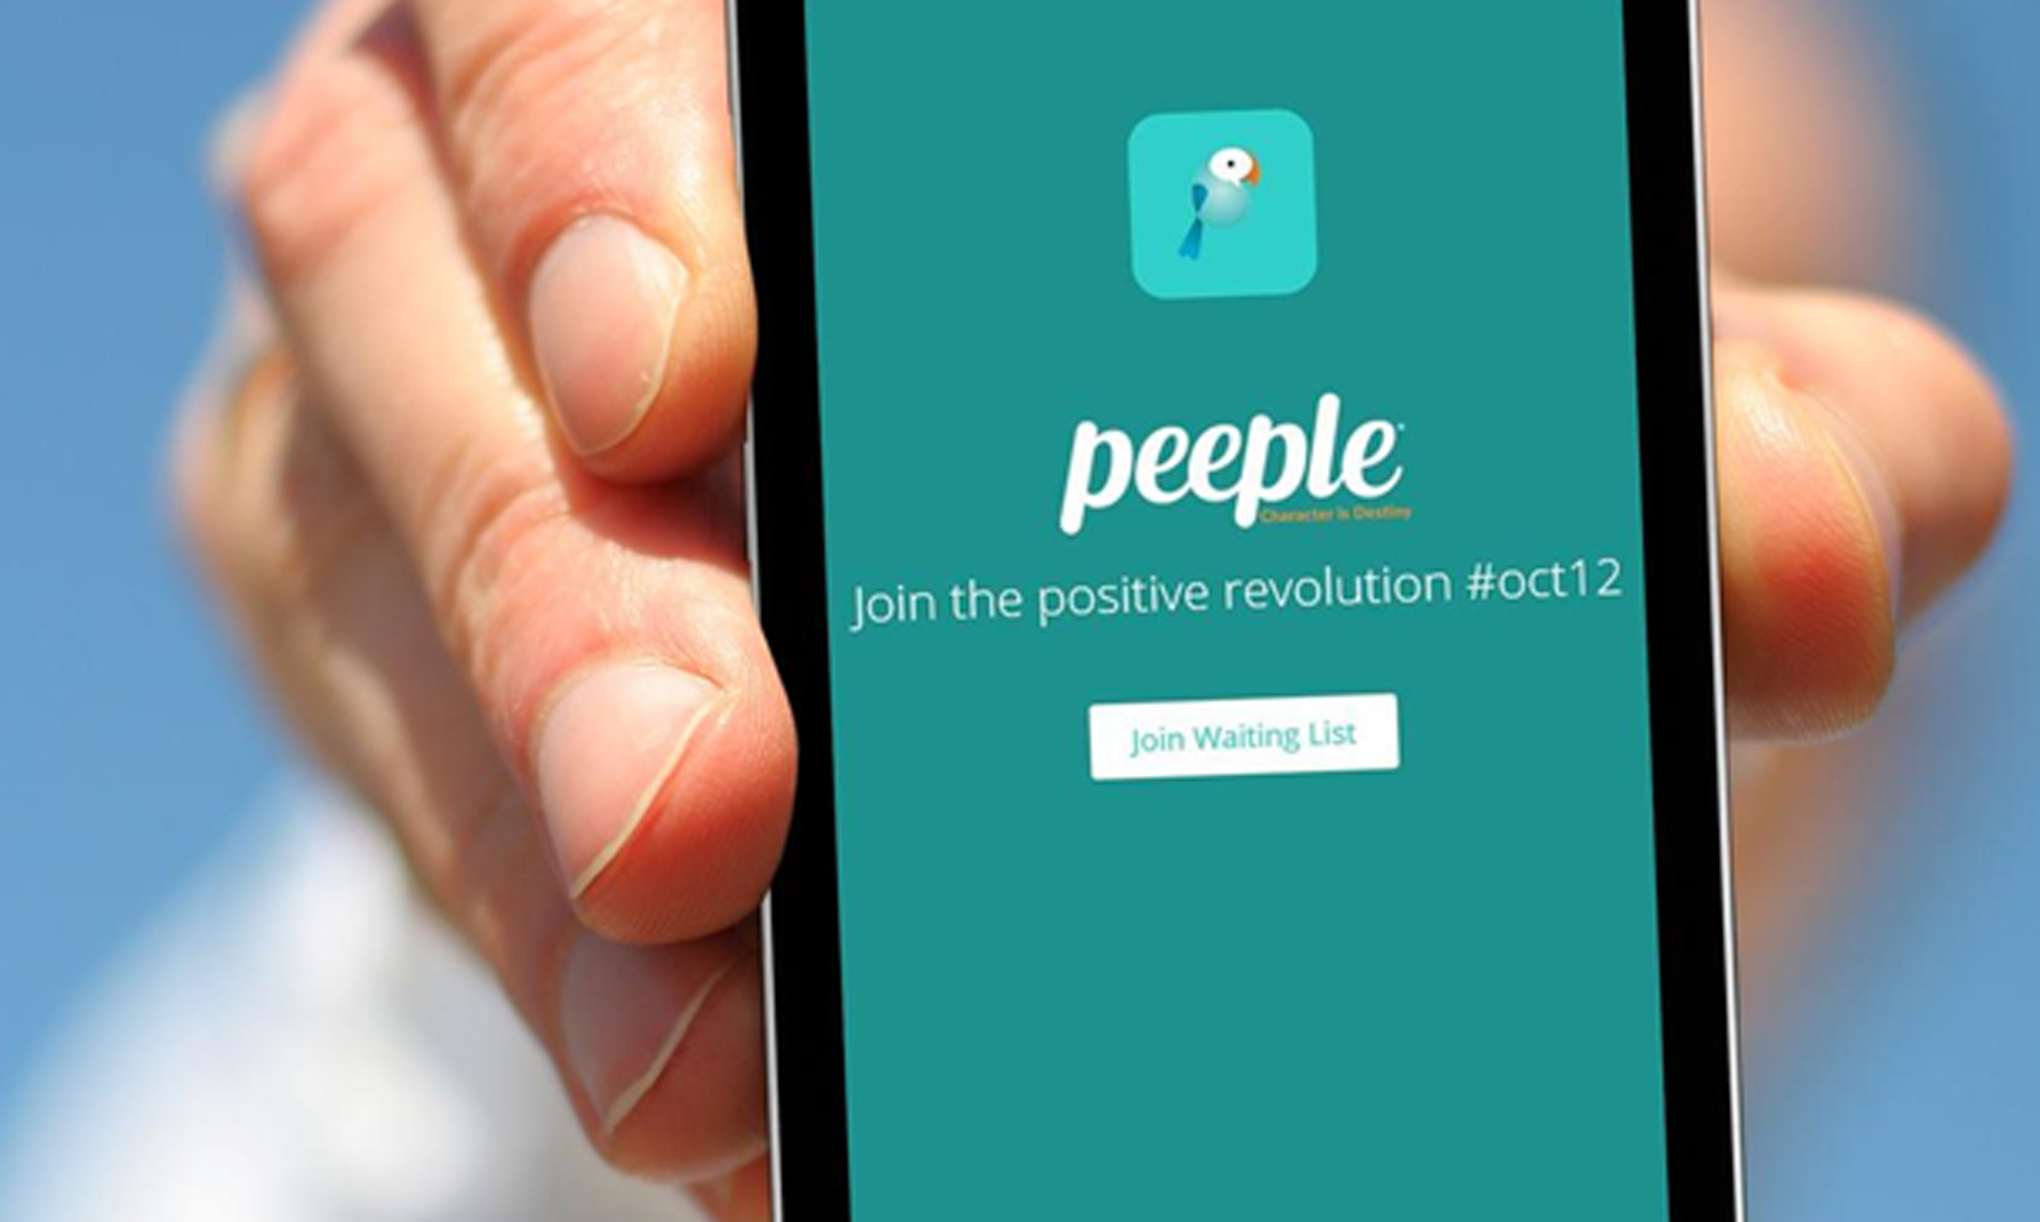 Peeple, an app under development and co-founded by an Orange County woman, came under Internet fire for its purpose to give people a star rating, much like Yelp. The founders have shifted gears and are now pitching the app as a positivity network.